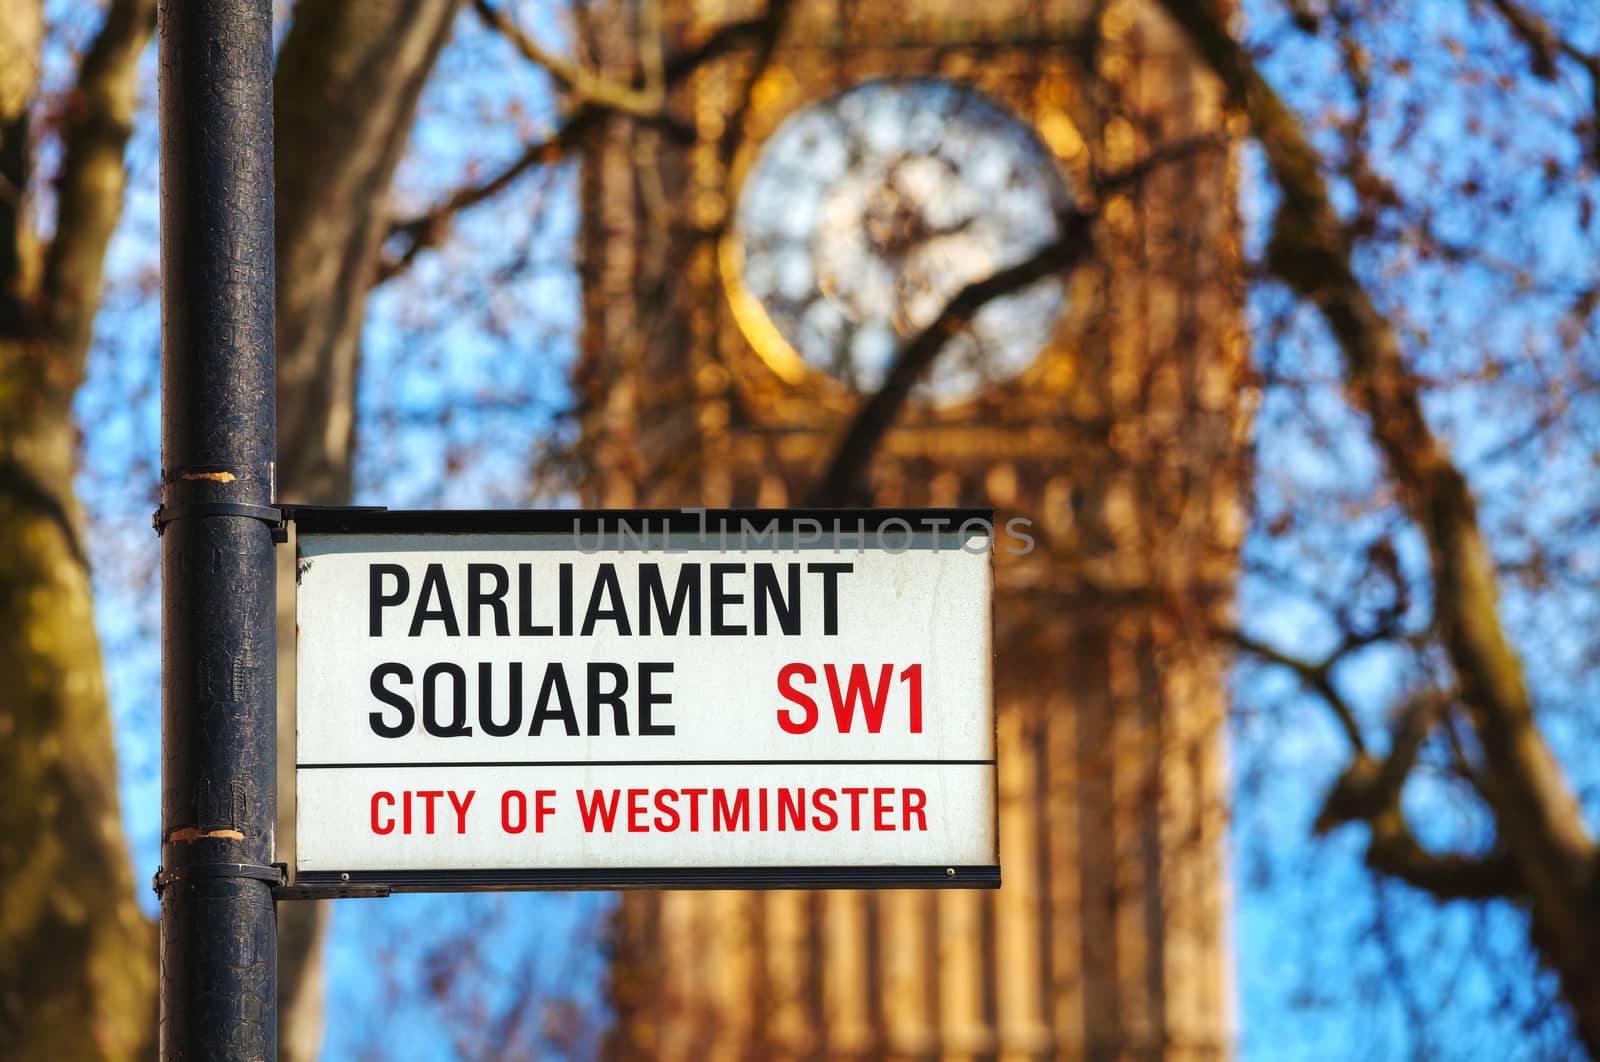 LONDON - APRIL 12: Parliament square sign in city of Westminster on April 12, 2015 in London, UK. It's a square at the northwest end of the Palace of Westminster in London.